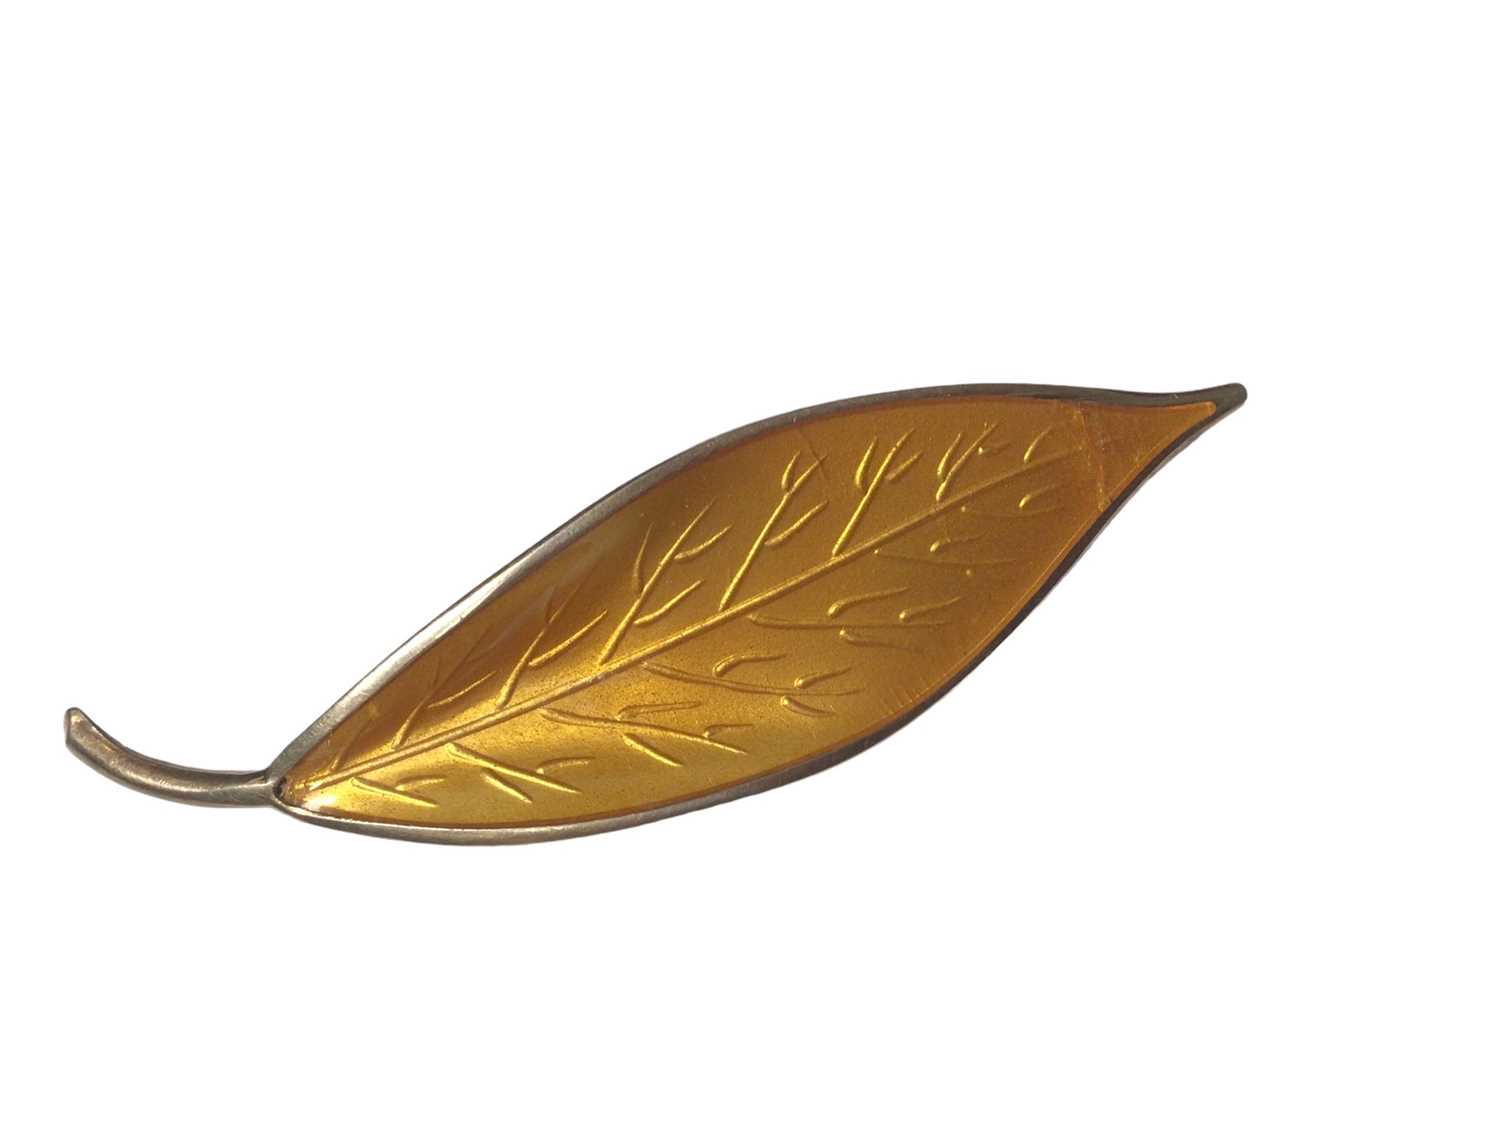 David Anderson Norwegian silver and enamel leaf brooch, other silver brooches, white metal Egyptian - Image 8 of 9